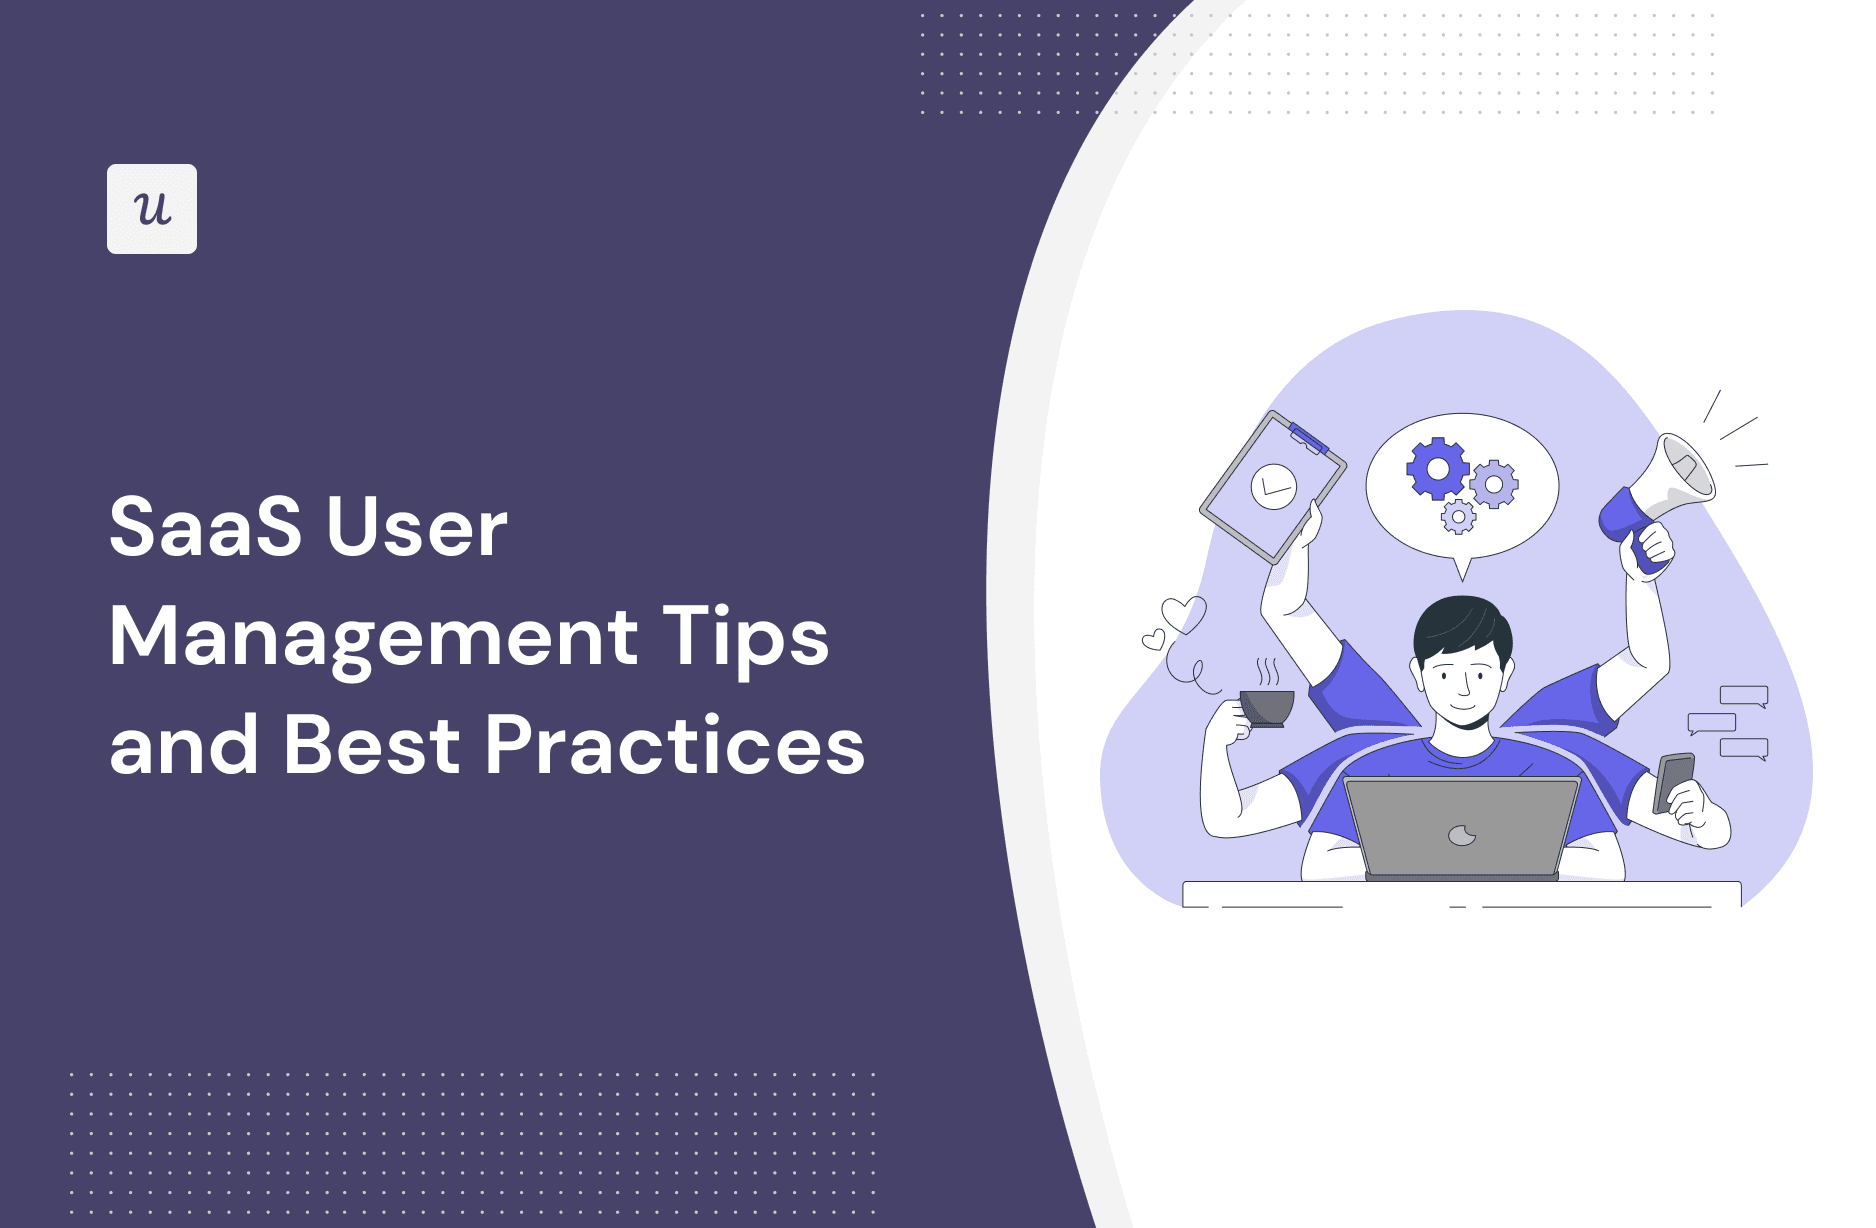 SaaS User Management Tips and Best Practices